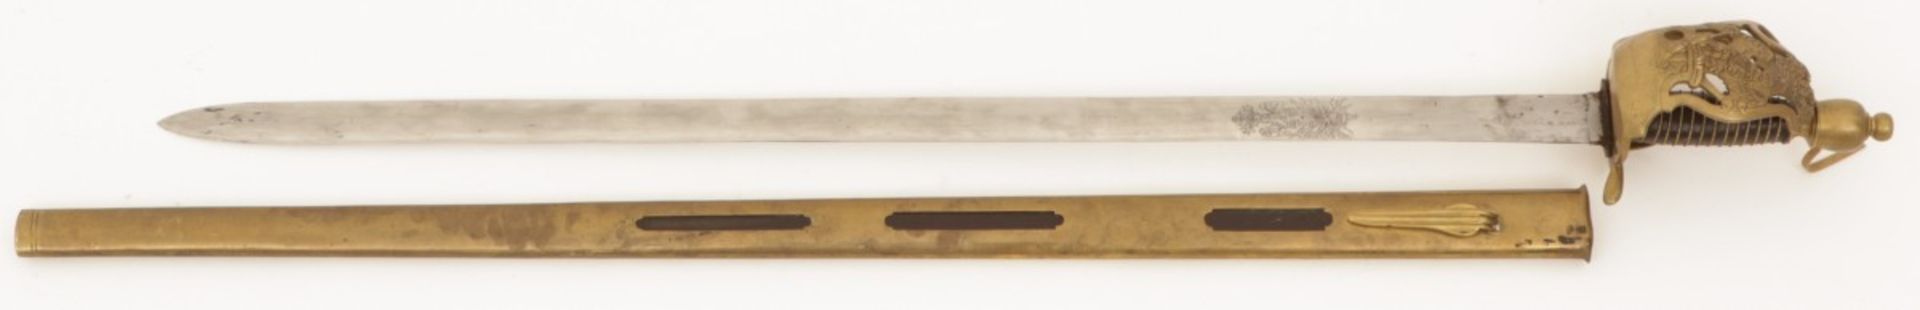 A replica Prussian Cavalry Officers' saber, 20th century.